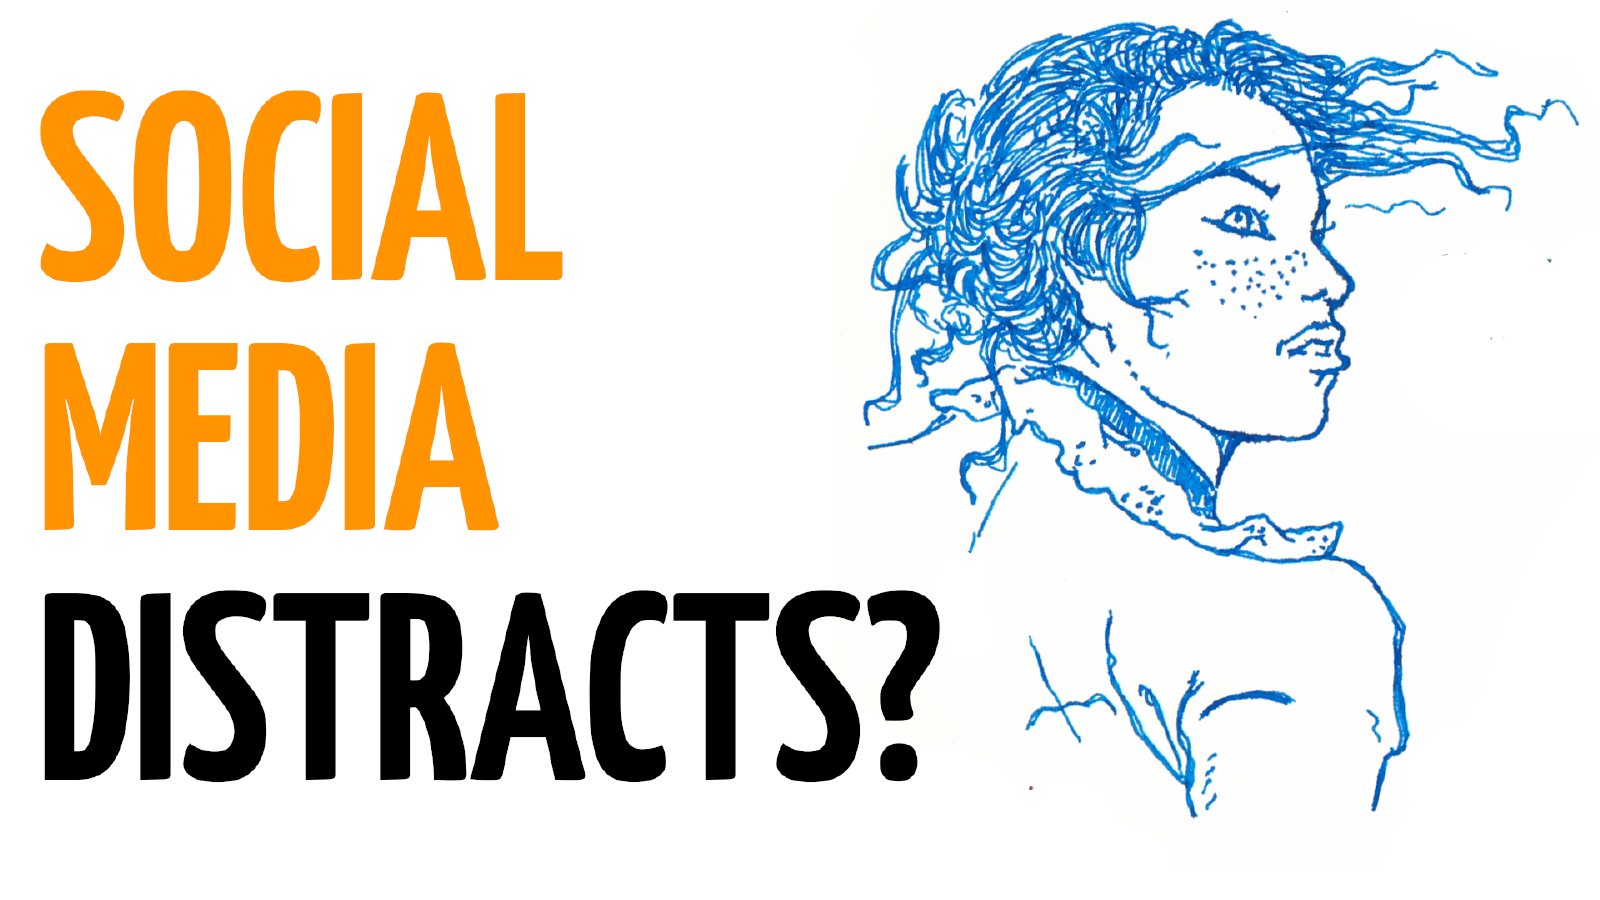 Is Social Media Distracting From Drawing?